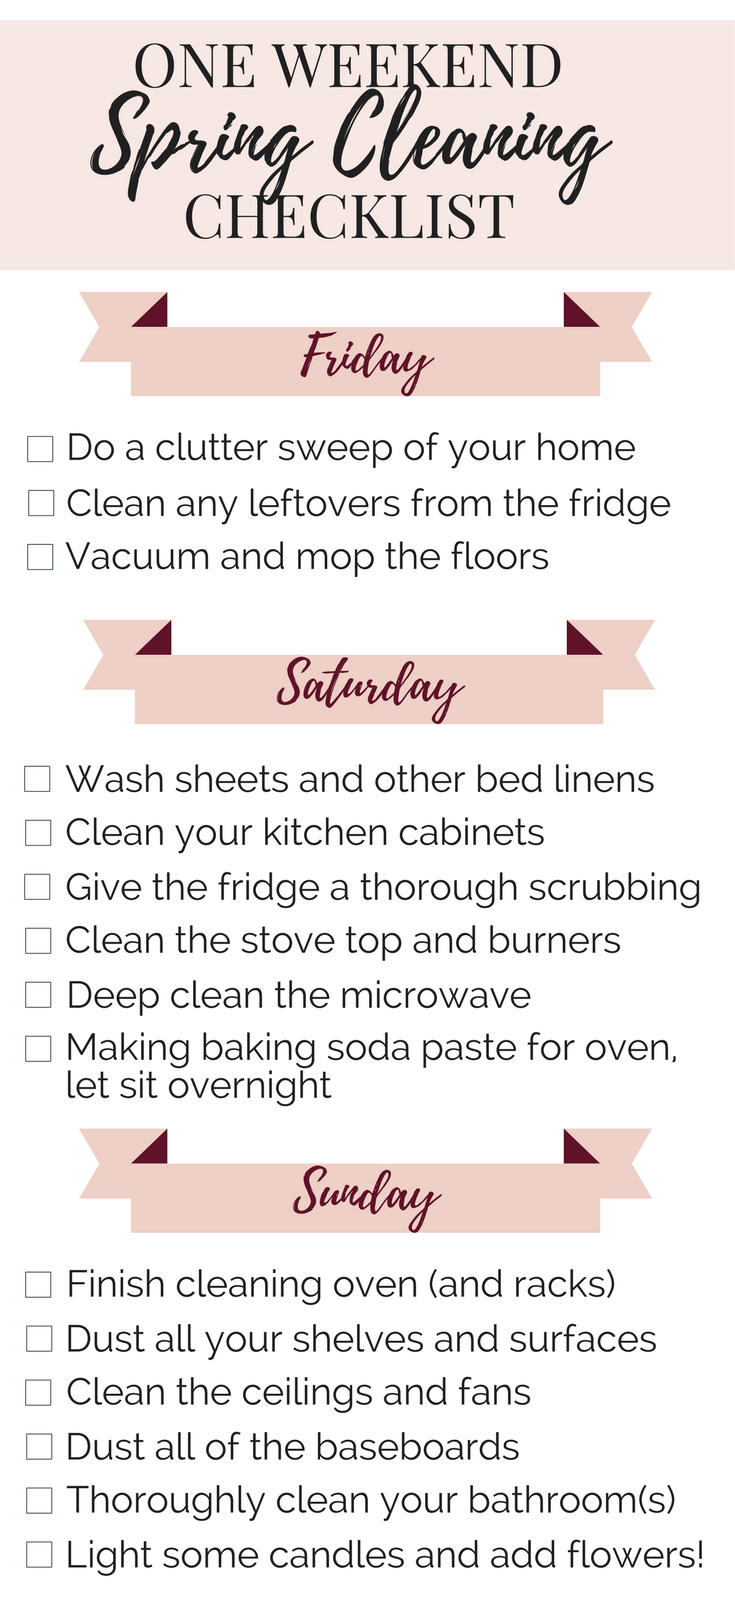 How to spring clean your house (the lazy way) in a weekend! Quick and easy checklist for deep cleaning your home in just three days.